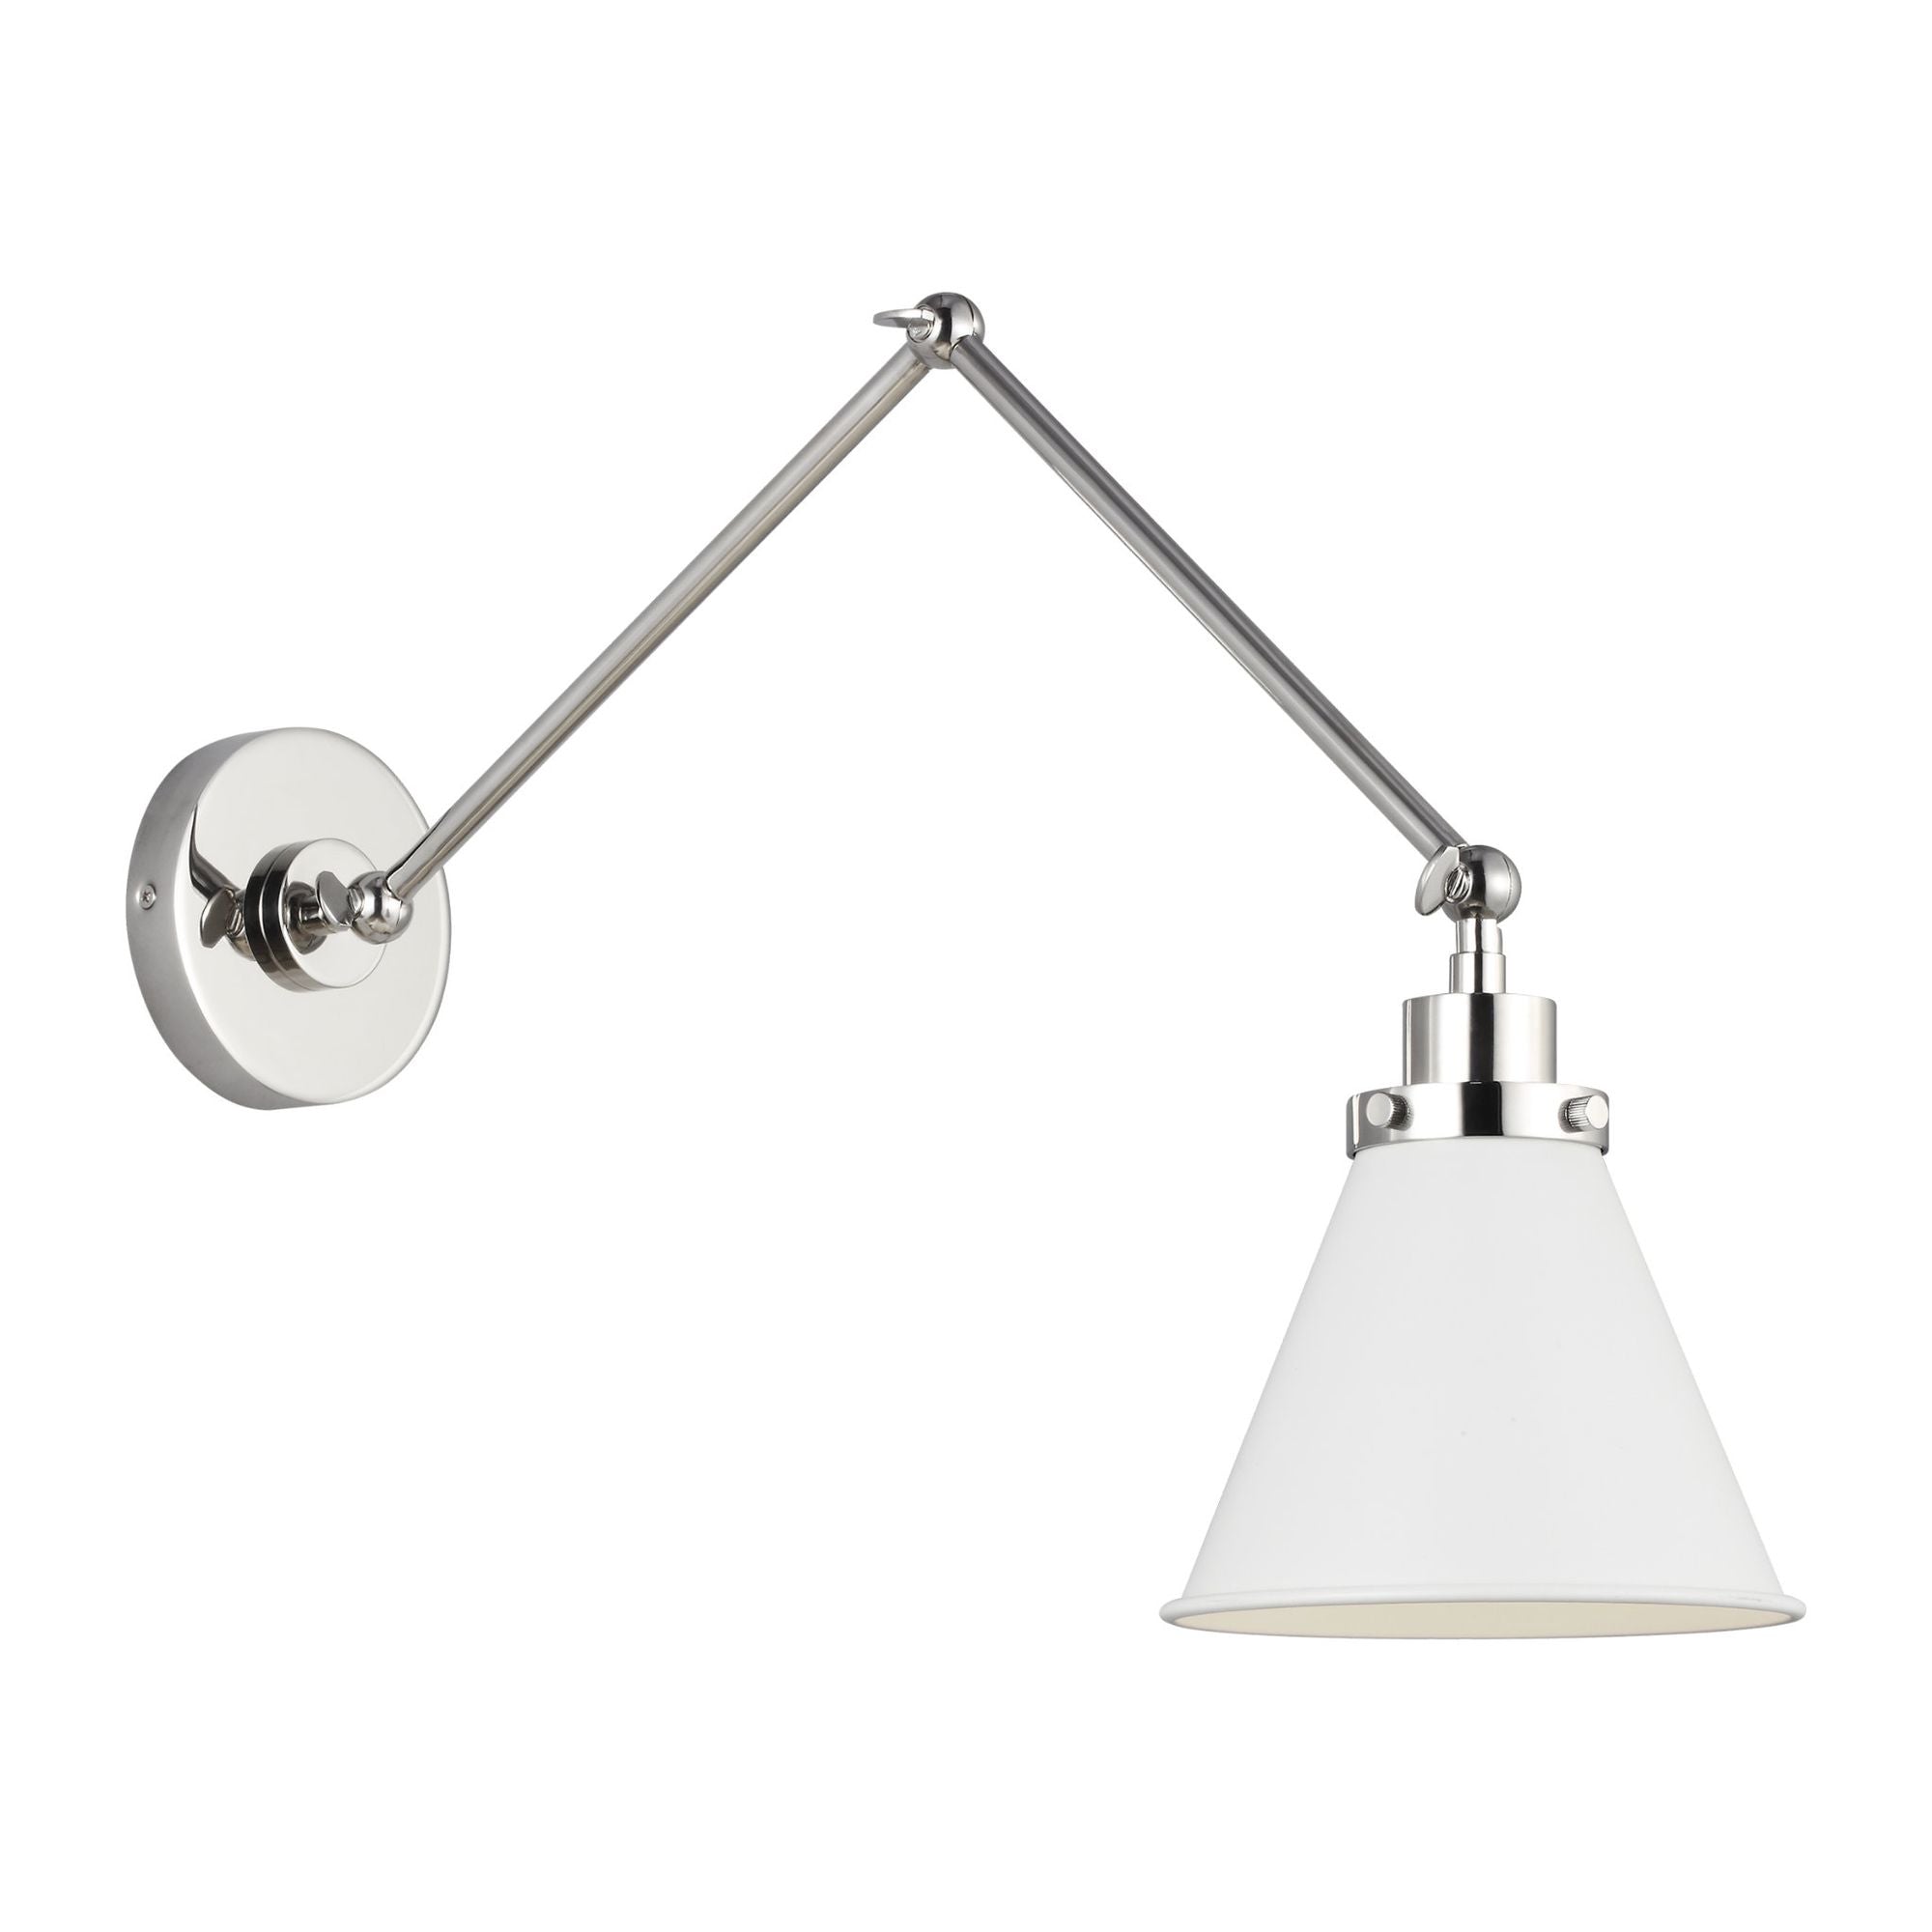 Chapman & Myers Wellfleet Double Arm Cone Task Sconce in Matte White and Polished Nickel